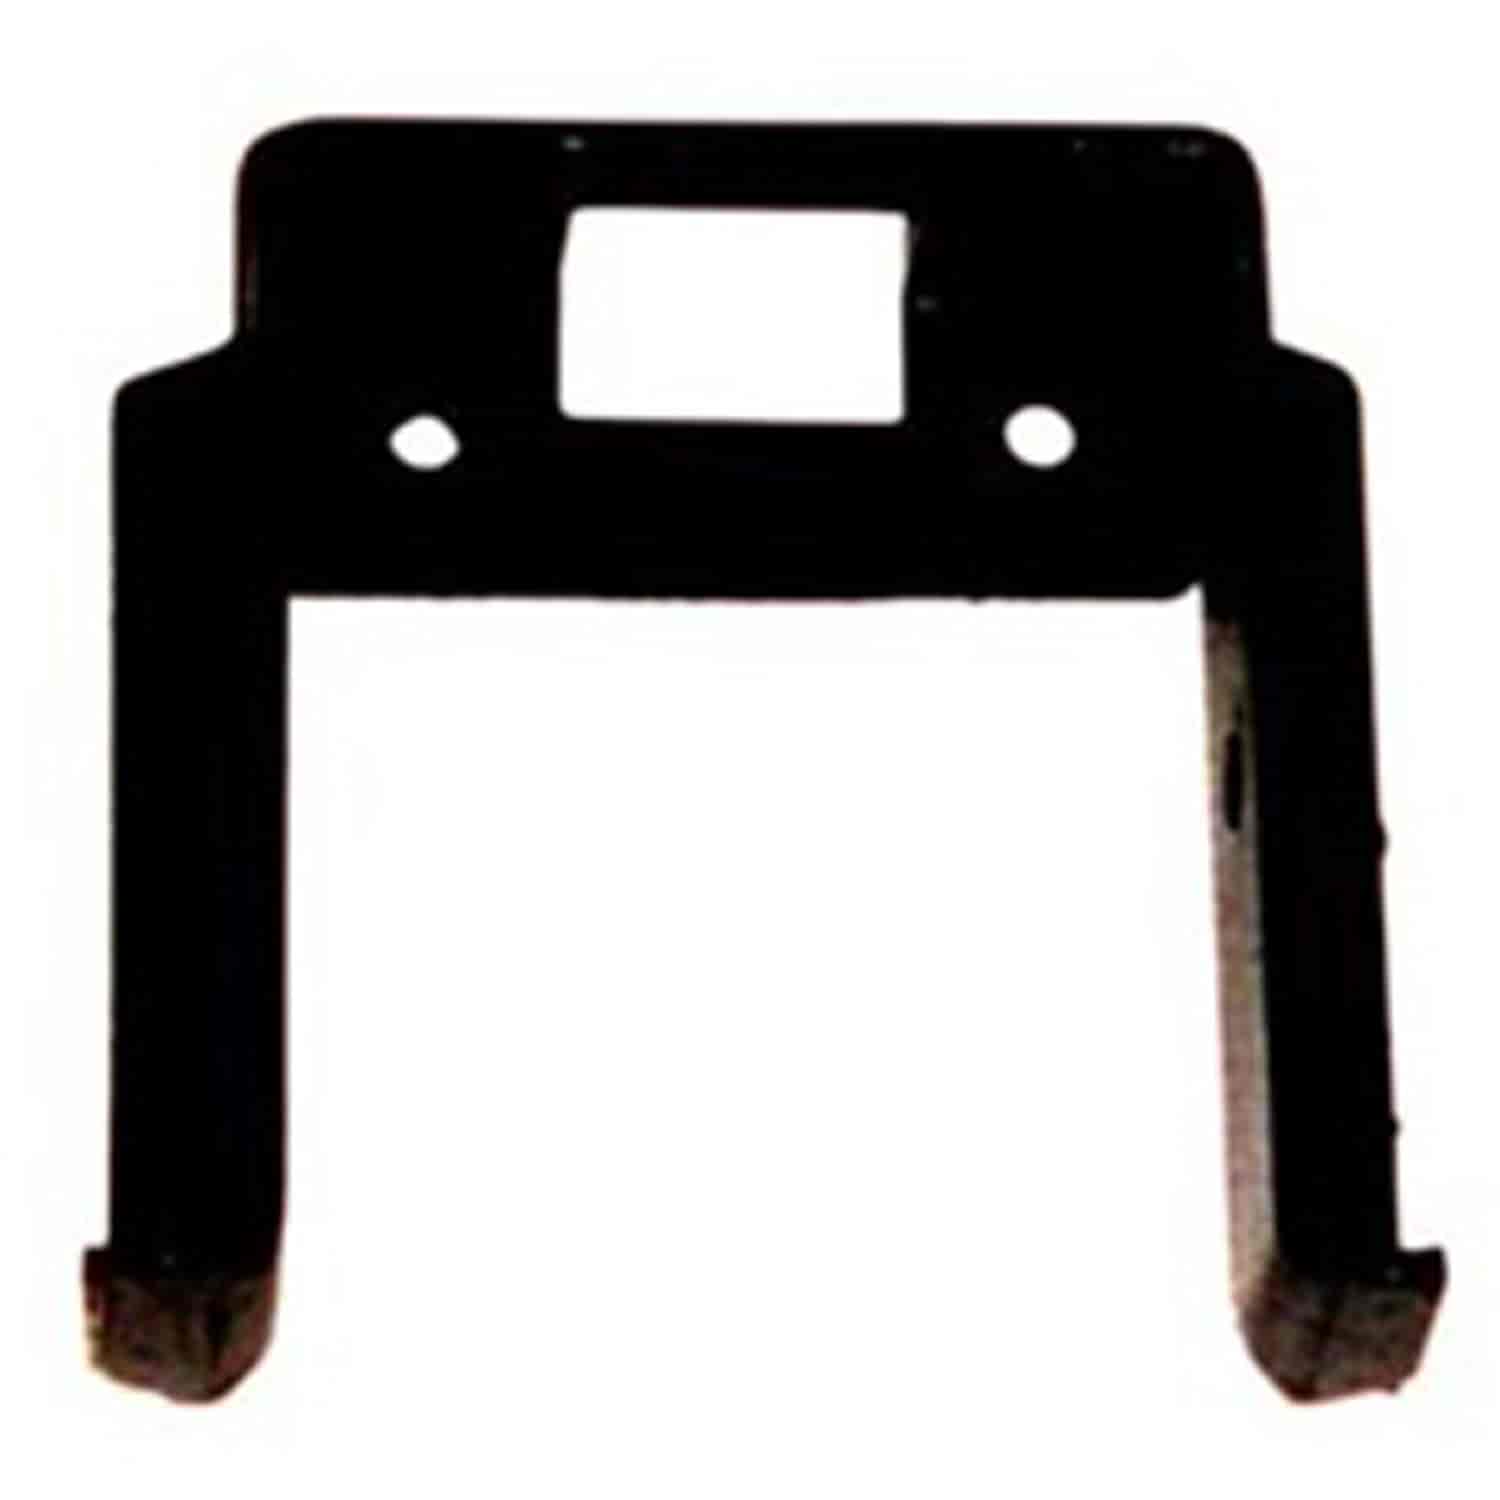 This reproduction rear seat to wheelhouse support from Omix-ADA fits 41-45 Willys MB and Ford GPW.